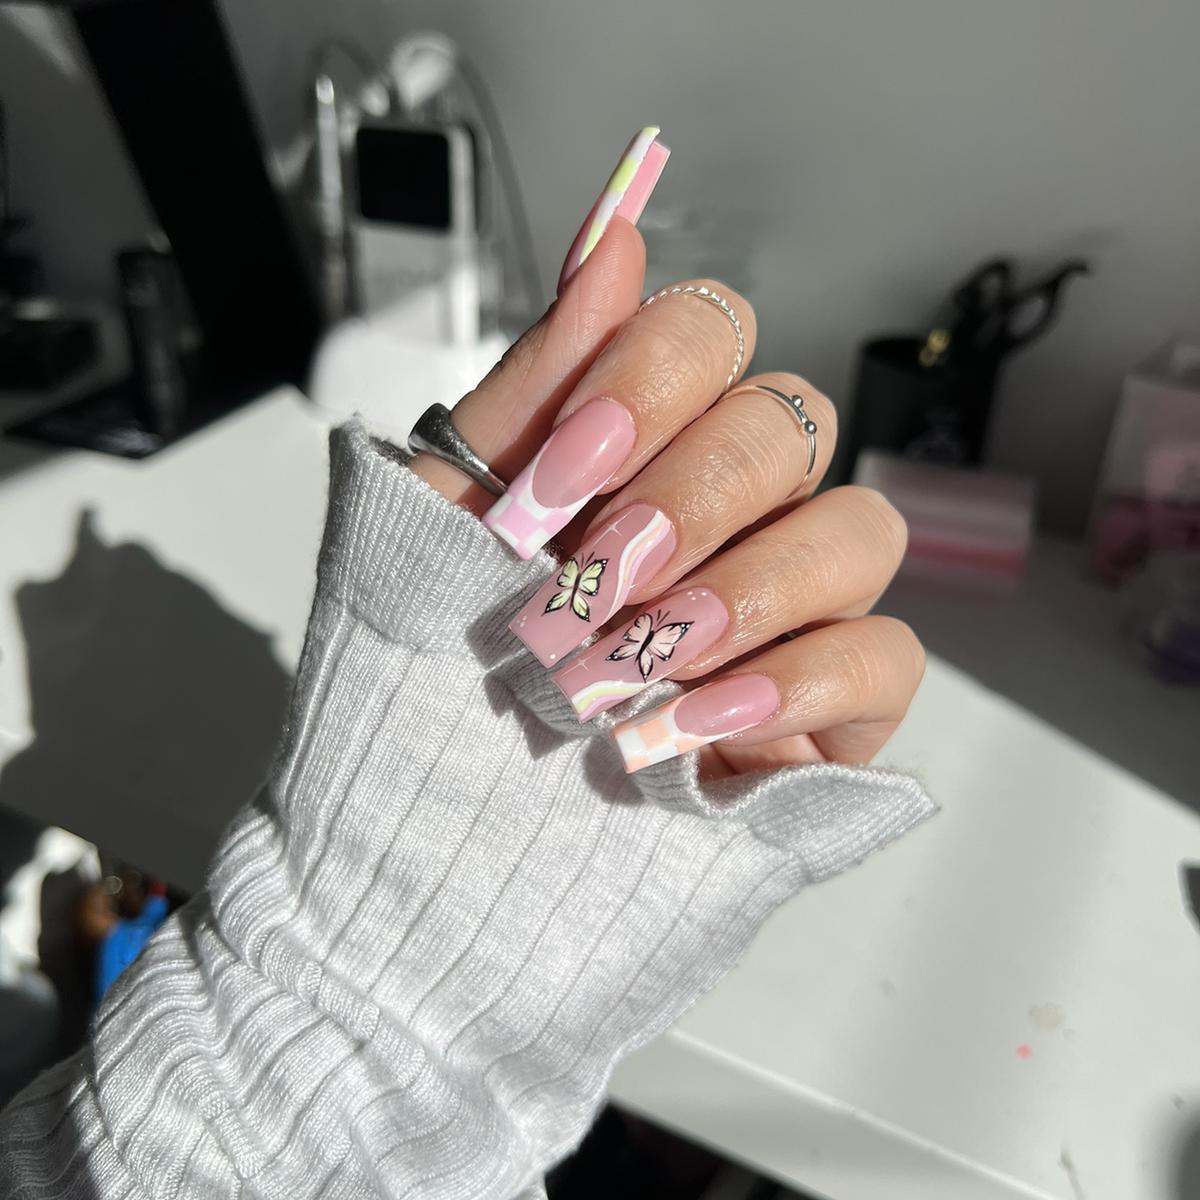 NudeyNails's images